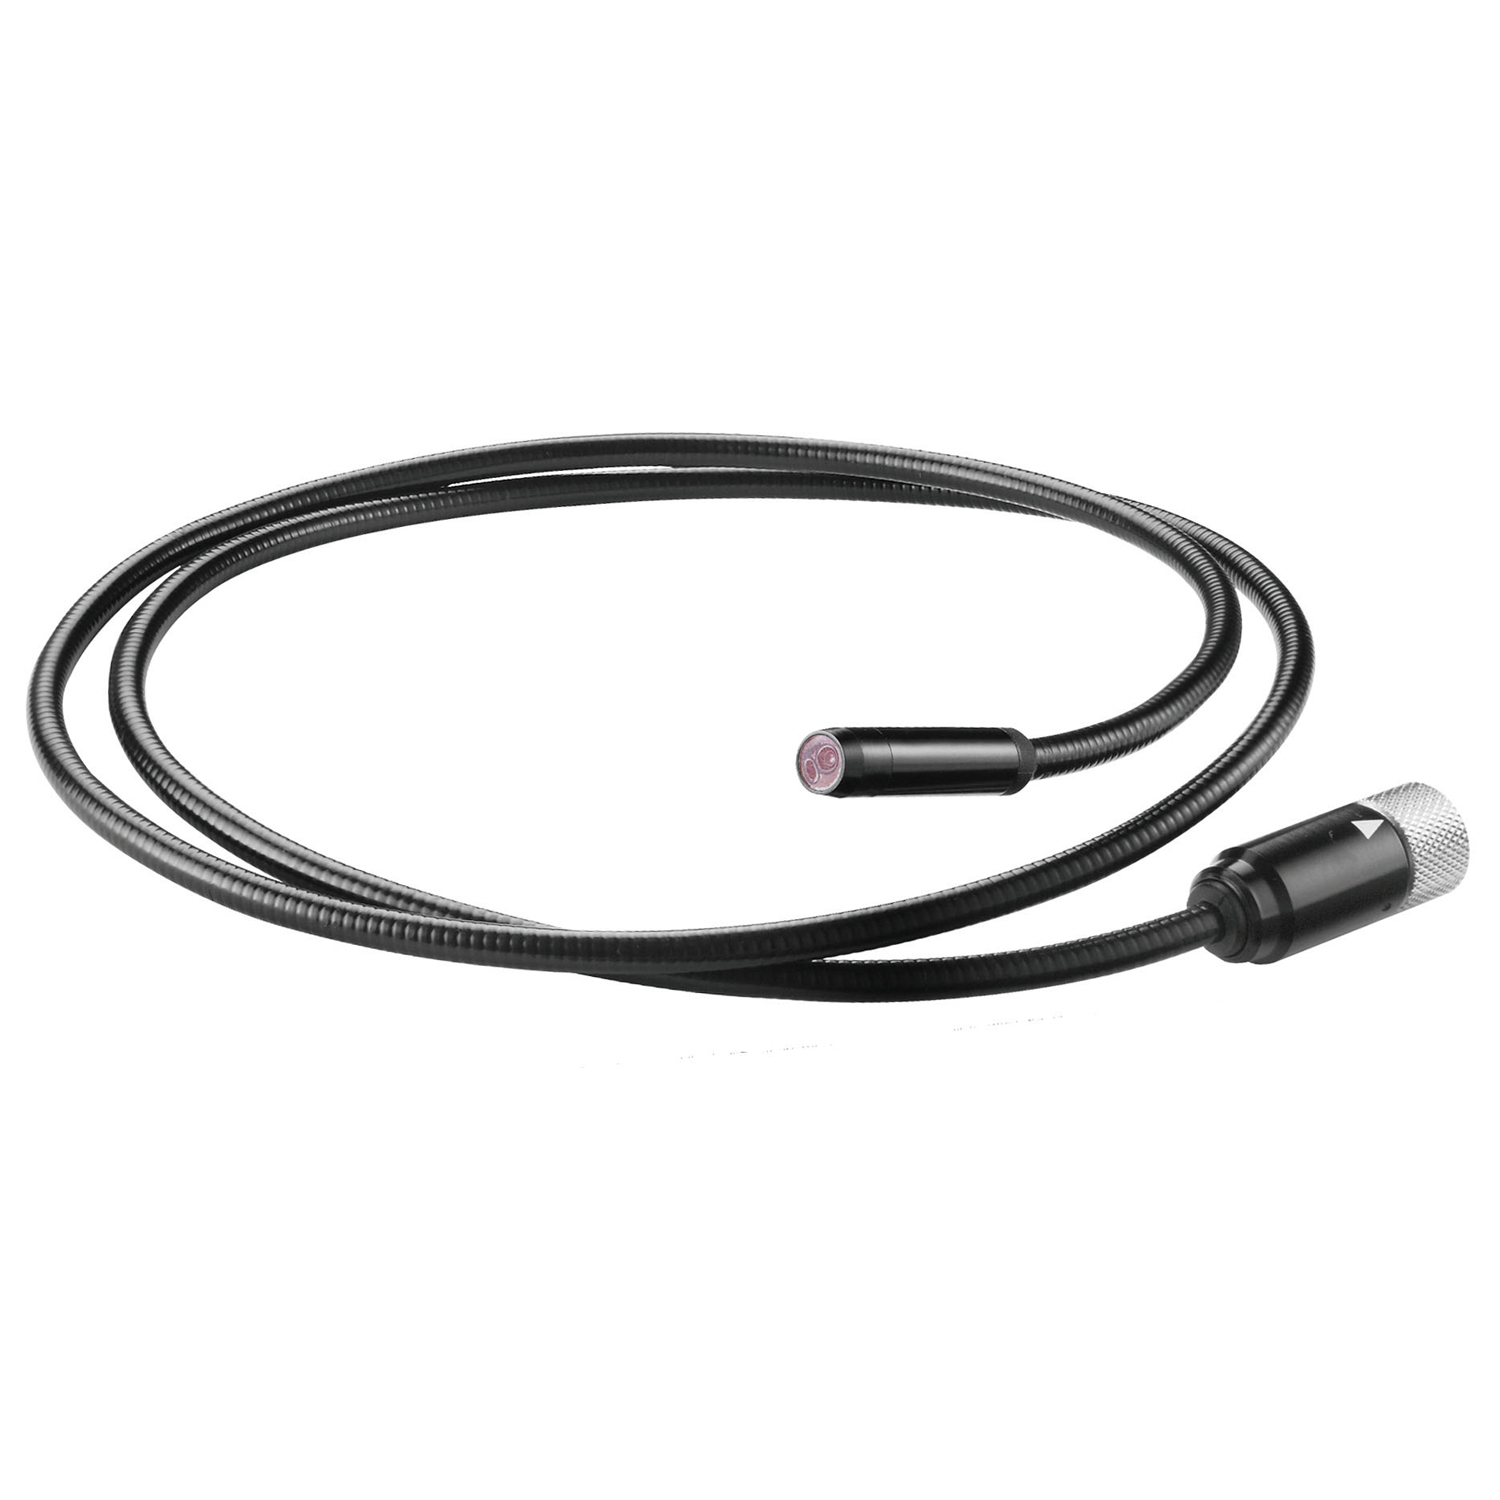 ACDelco Power Tool - CIC802 Hard Camera Cable (2M)  8mm